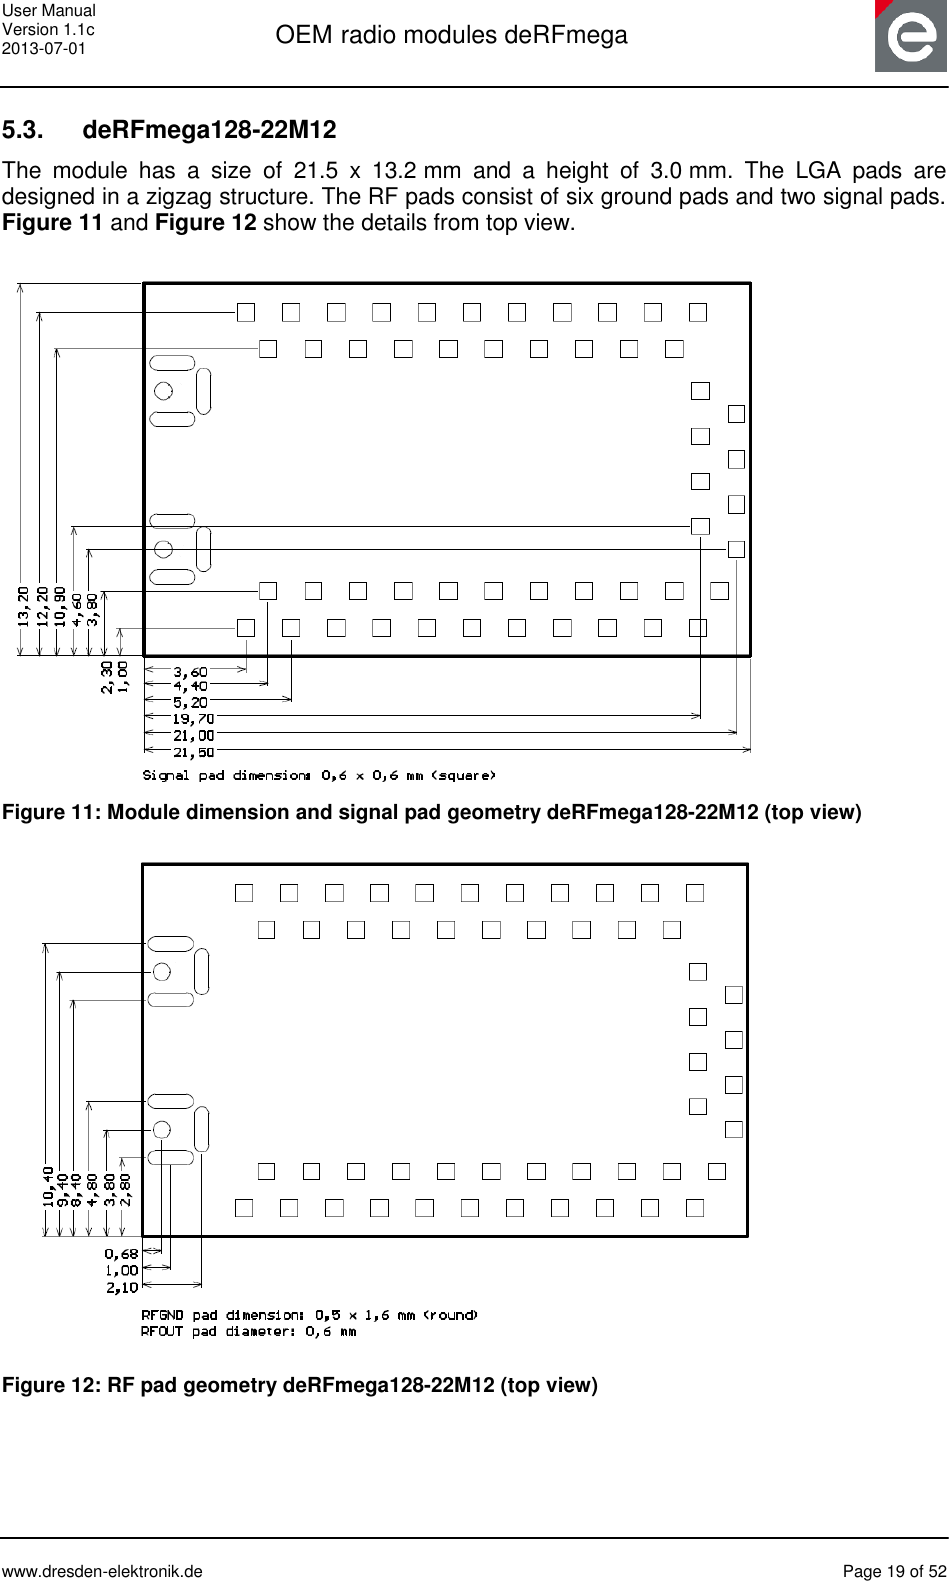 User Manual Version 1.1c 2013-07-01  OEM radio modules deRFmega      www.dresden-elektronik.de  Page 19 of 52  5.3.   deRFmega128-22M12 The  module  has  a  size  of  21.5  x  13.2 mm  and  a  height  of  3.0 mm.  The  LGA  pads  are designed in a zigzag structure. The RF pads consist of six ground pads and two signal pads. Figure 11 and Figure 12 show the details from top view.   Figure 11: Module dimension and signal pad geometry deRFmega128-22M12 (top view)        Figure 12: RF pad geometry deRFmega128-22M12 (top view)   